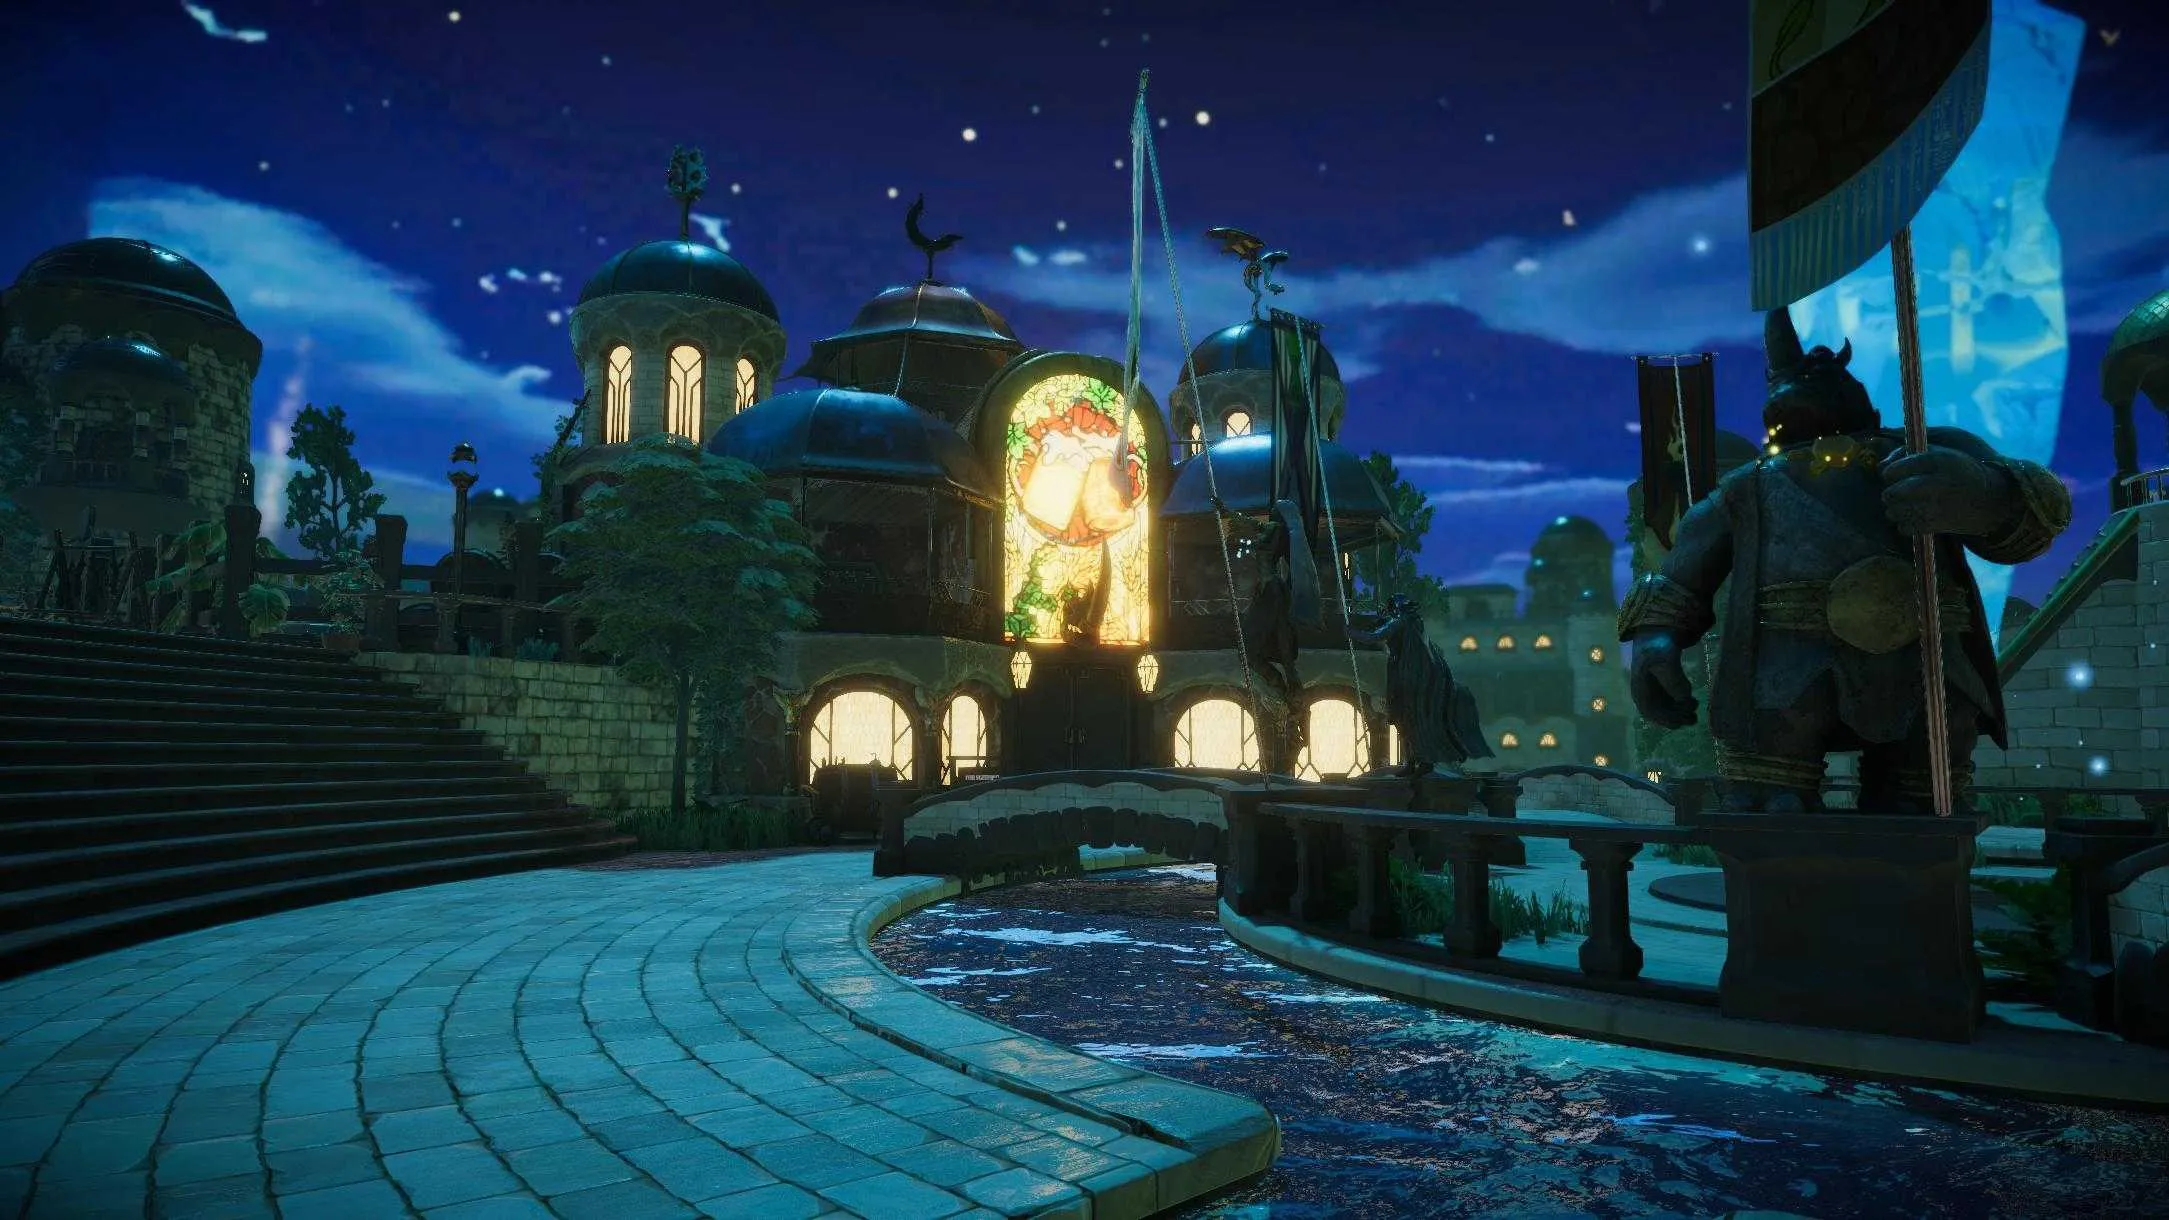 A Champions Ascension picture shows a nighttime scene in the world of Massina, where players collect, train, equip, and manage their own champions.